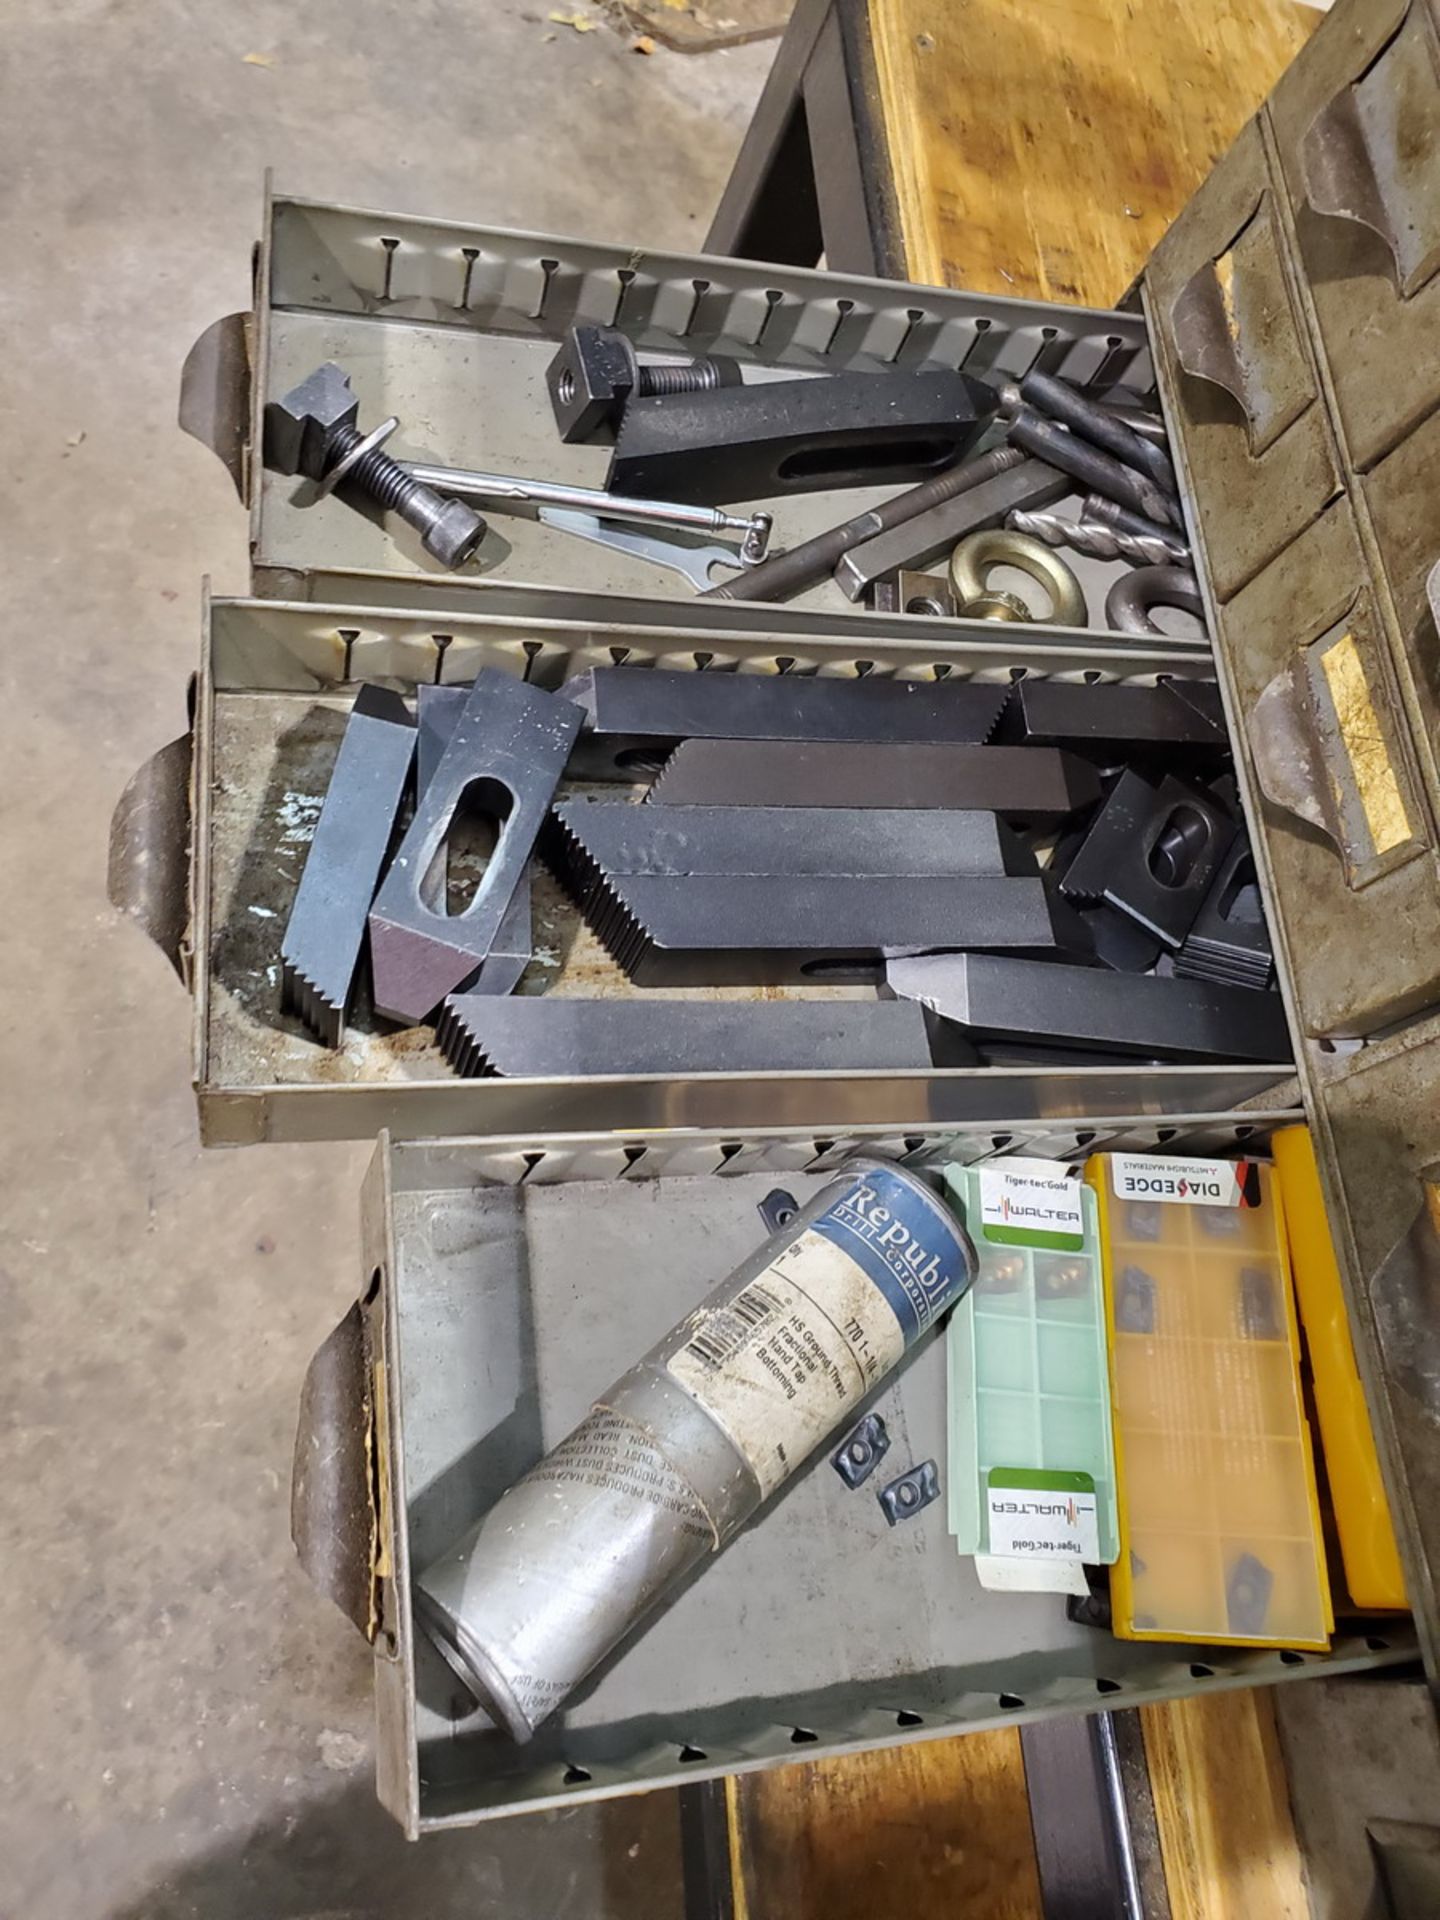 Assorted Matl. To Include But Not Limited To: Drill bits, Carbide Inserts, W/ Parts Bin, etc. - Image 12 of 13